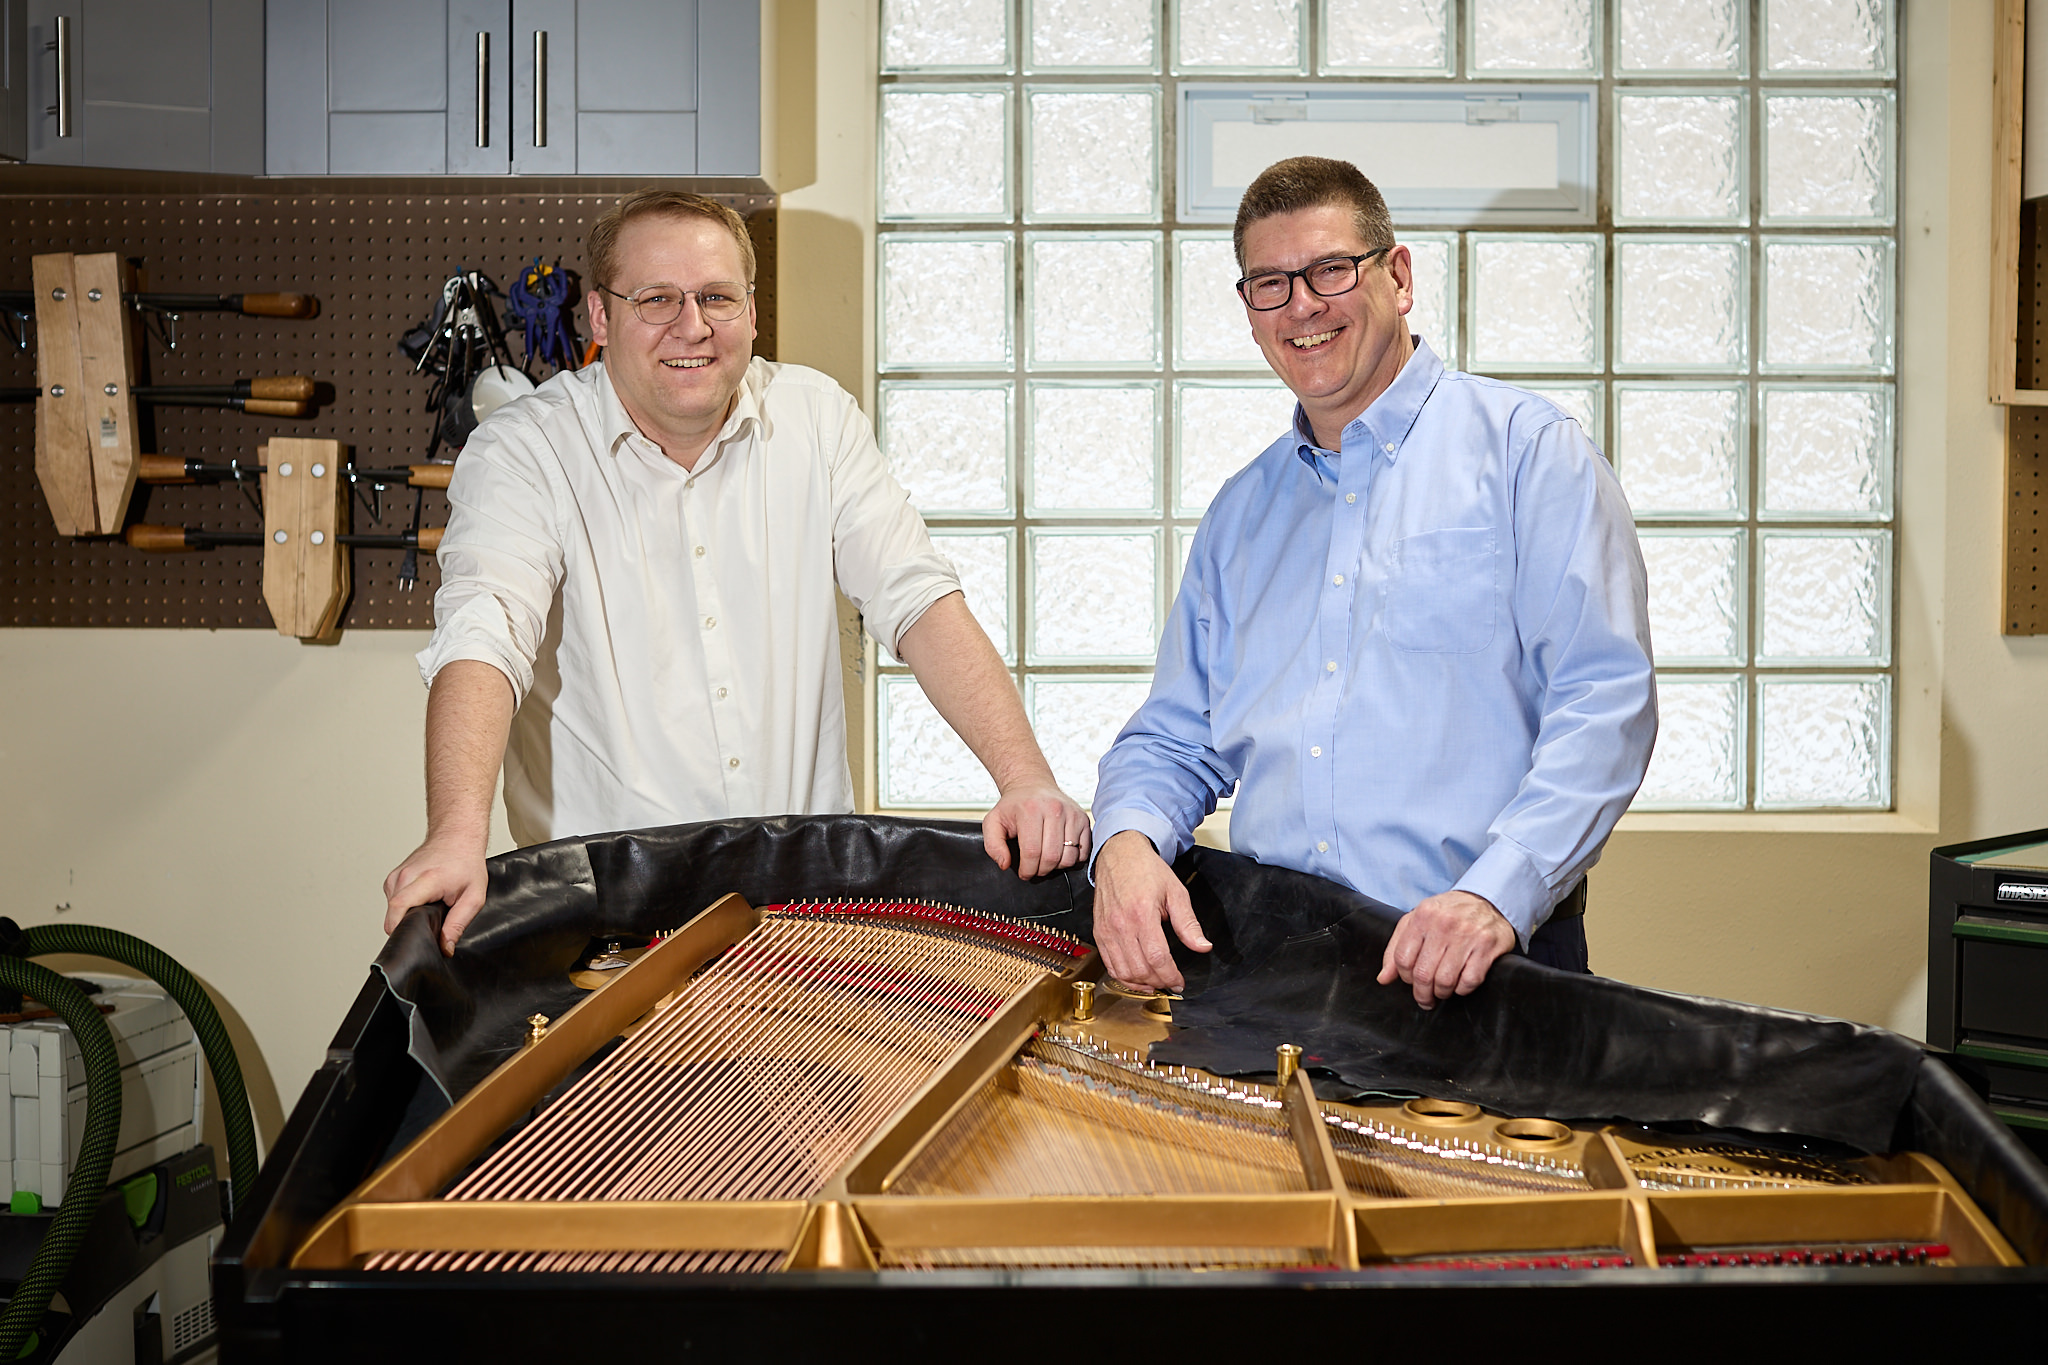 Piano techs, Dave and Tom in the workshop